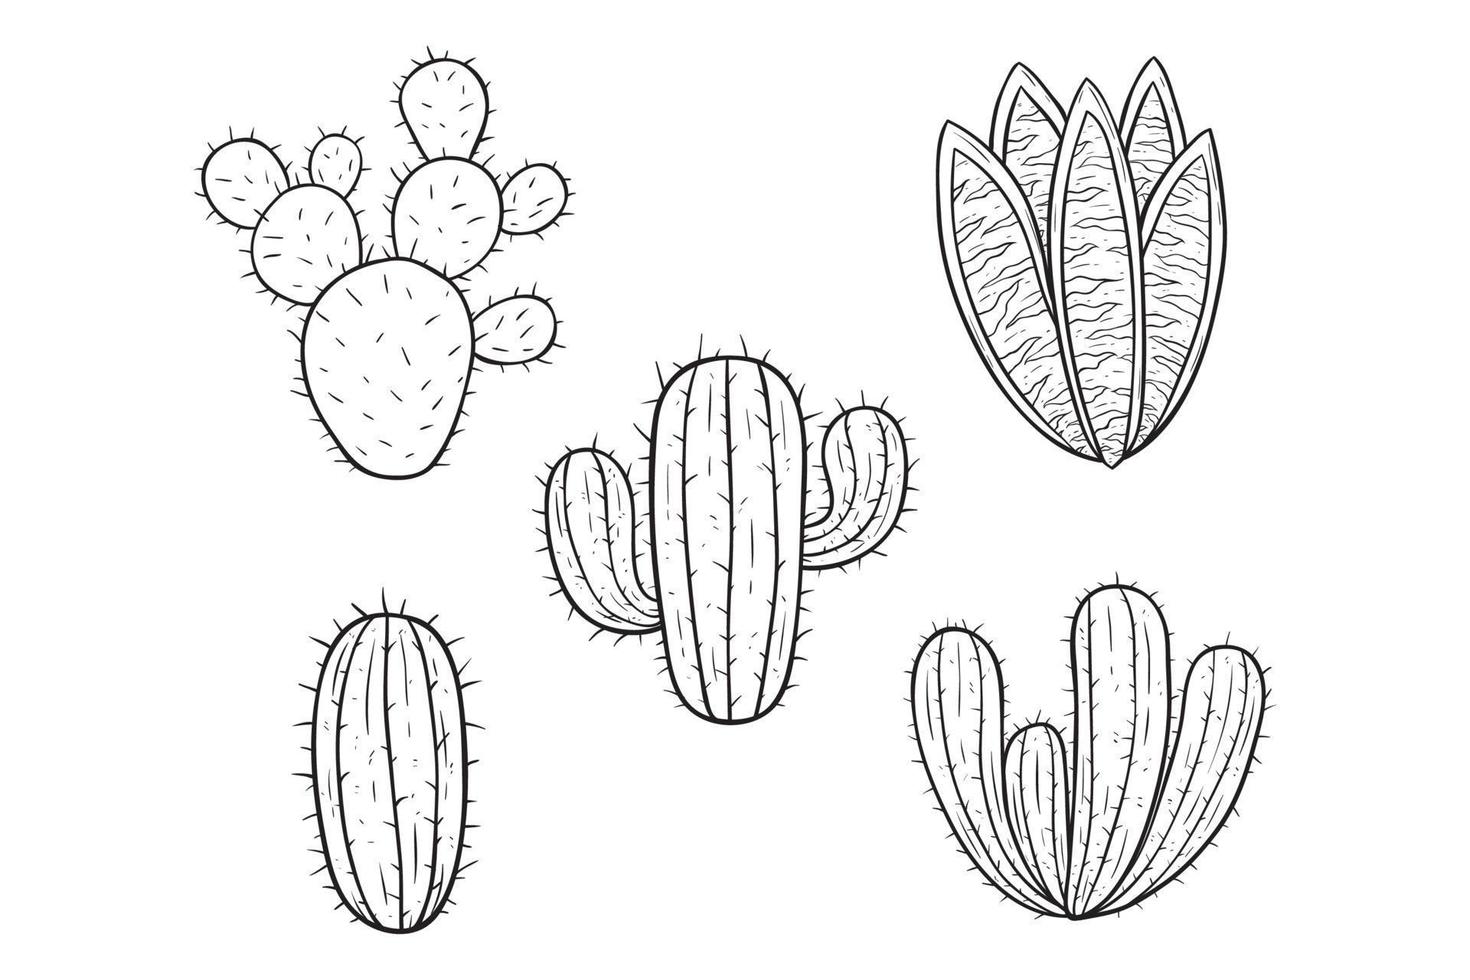 cactus collection with hand drawn style on white background vector